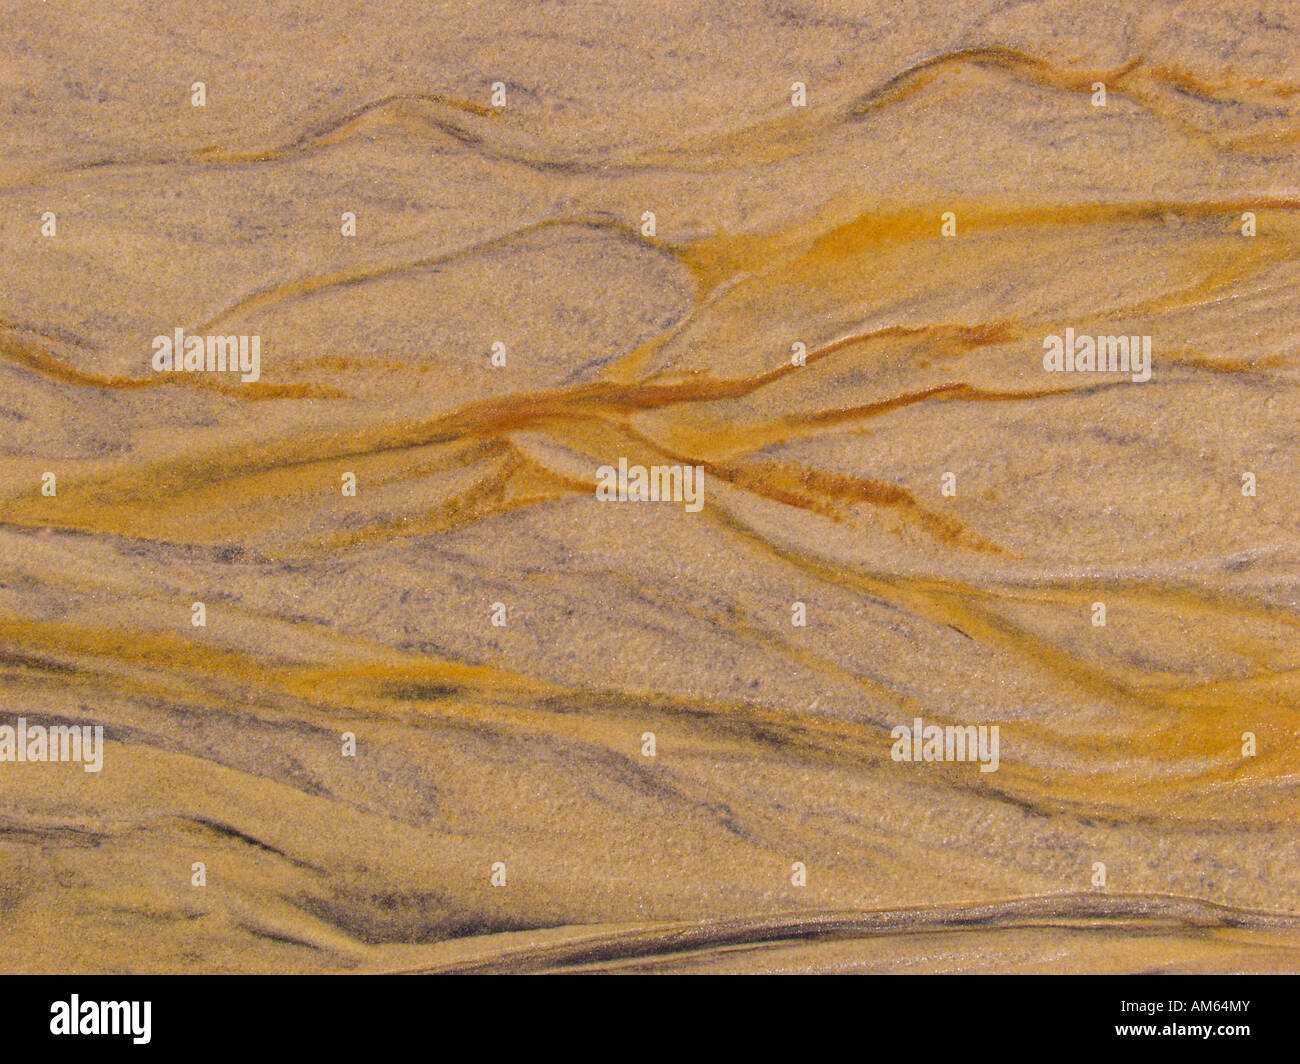 abstract design pattern abstract sand oil minerals iron materials rainbow color colour photograph close up macro landscape moons Stock Photo